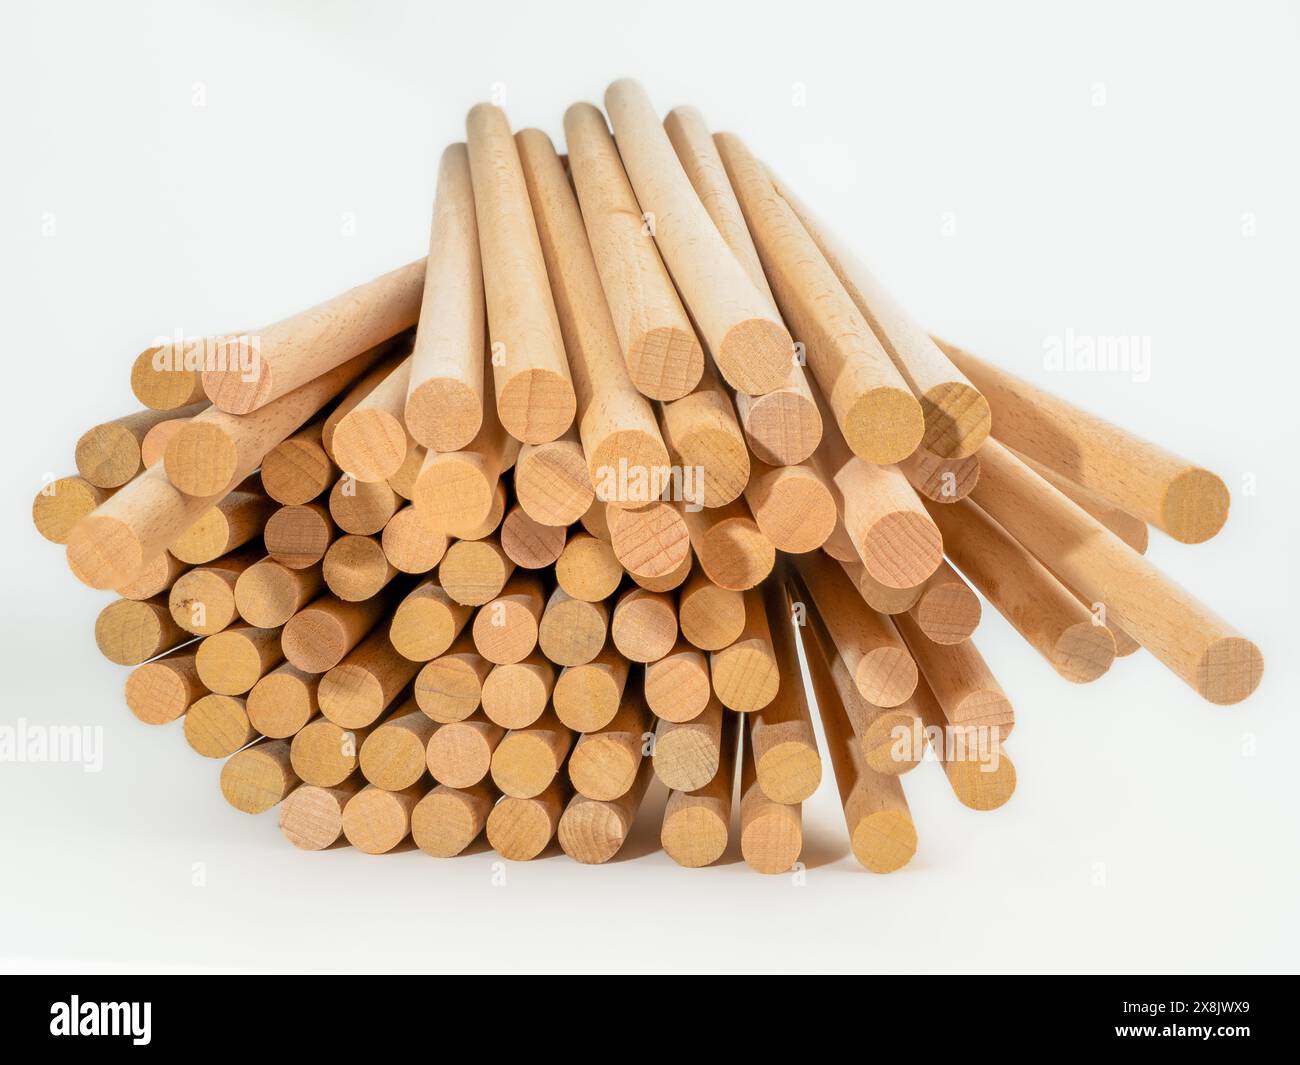 stack of hardwood dowel rods pins for crafting and woodworking Stock Photo